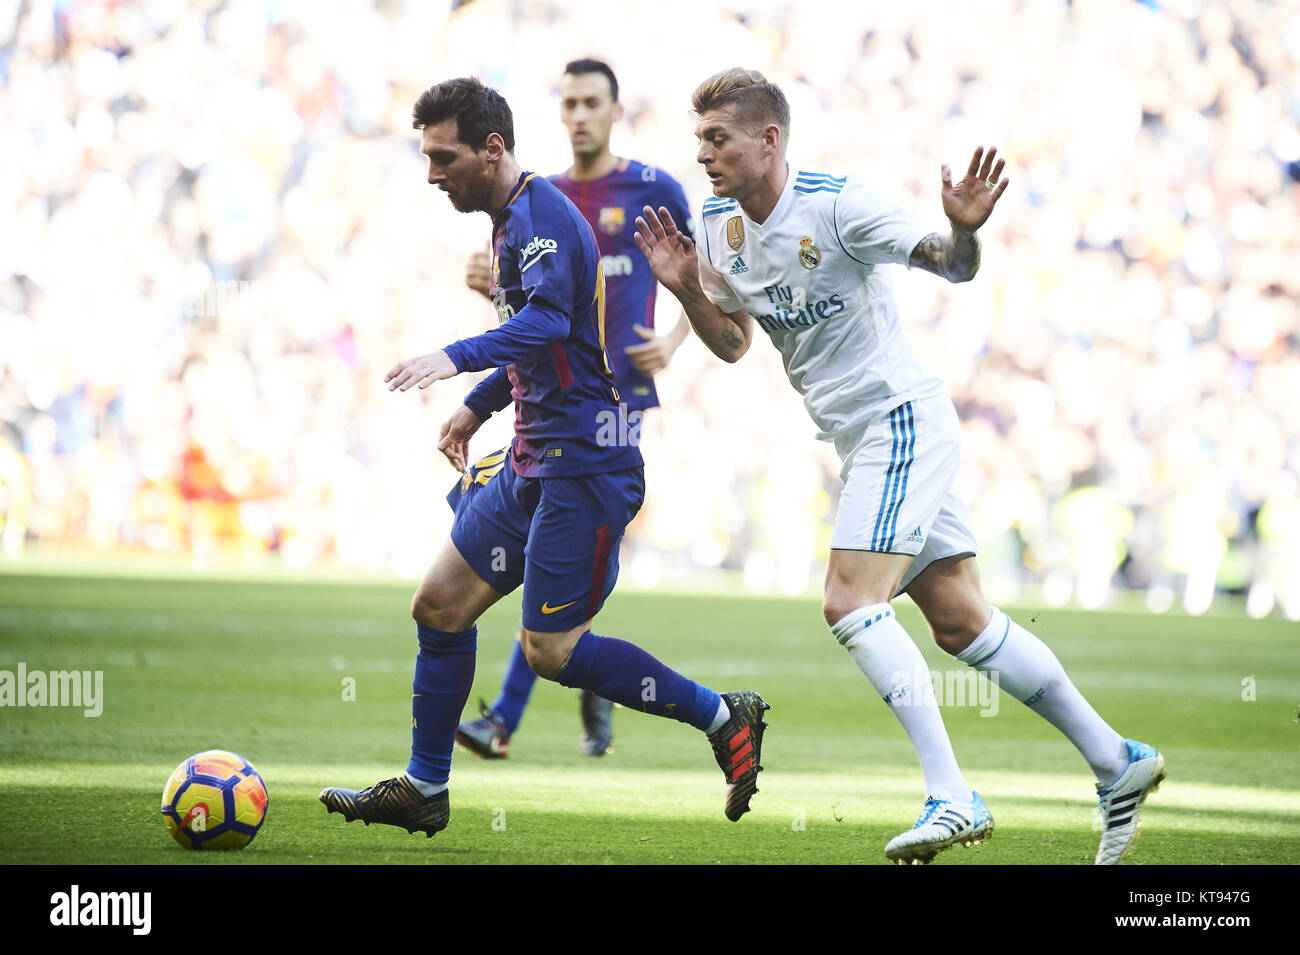 Madrid, Spain. 23rd Dec, 2017. Lionel Messi (forward; Barcelona), Toni Kroos (midfielder; Real Madrid) in action during La Liga match between Real Madrid and FC Barcelona at Santiago Bernabeu on December 23, 2017 in Madrid Credit: Jack Abuin/ZUMA Wire/Alamy Live News Stock Photo